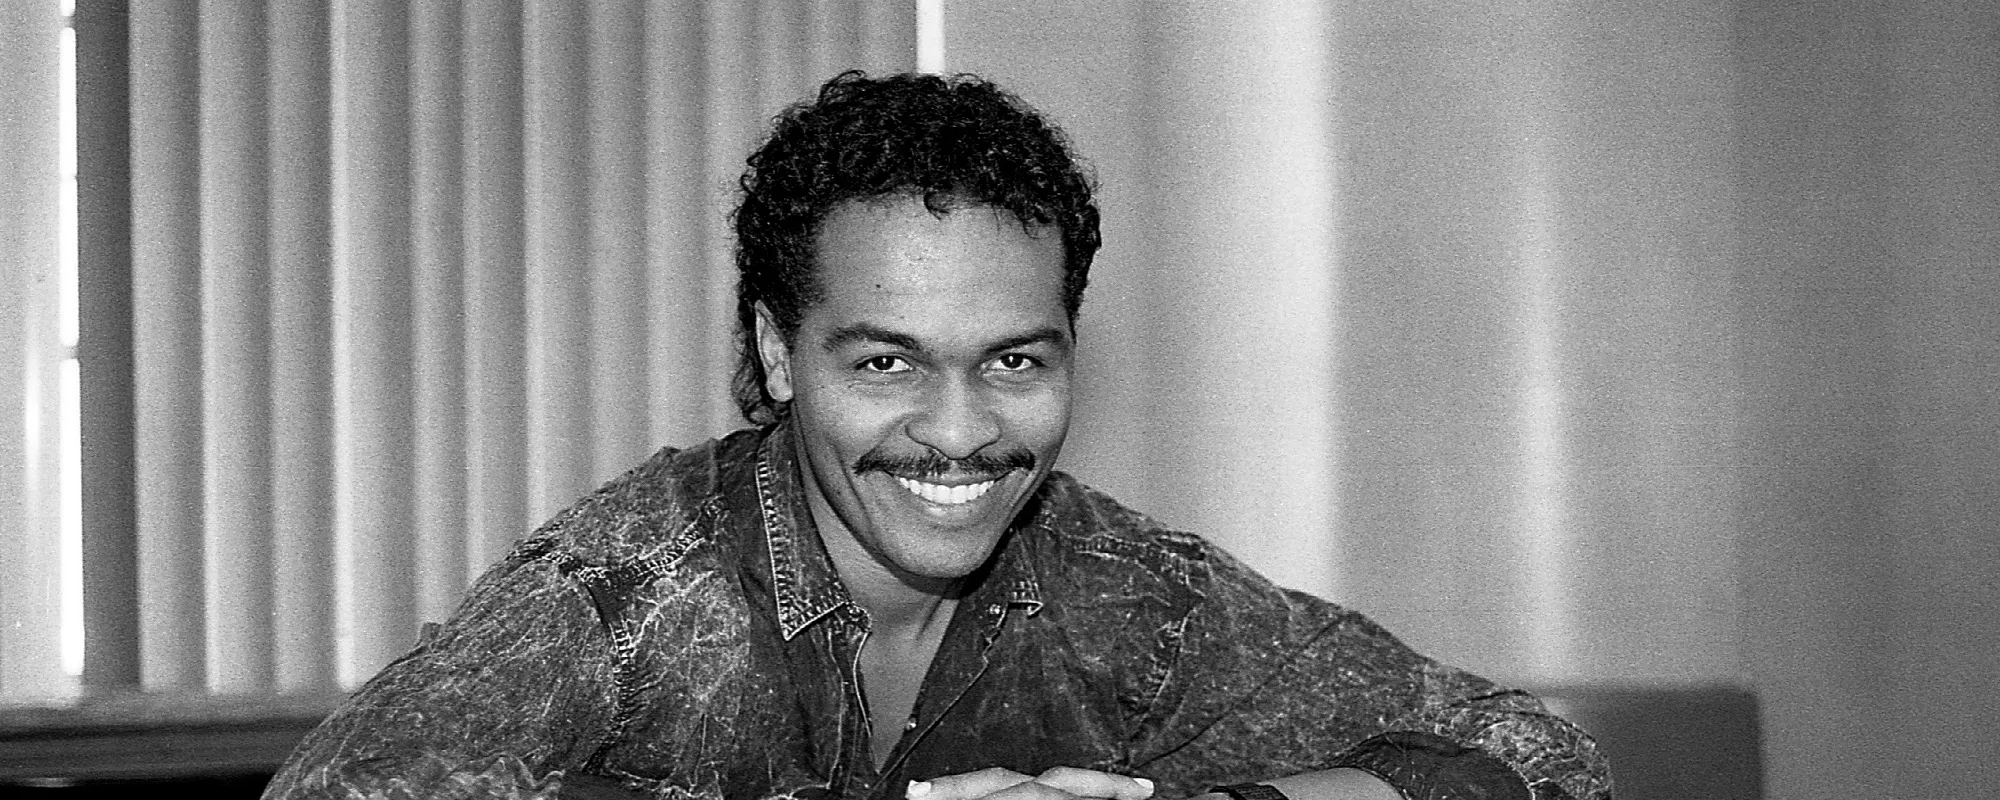 7 Songs You Didn’t Know “Ghostbusters” Writer Ray Parker Jr. Wrote for Other Artists